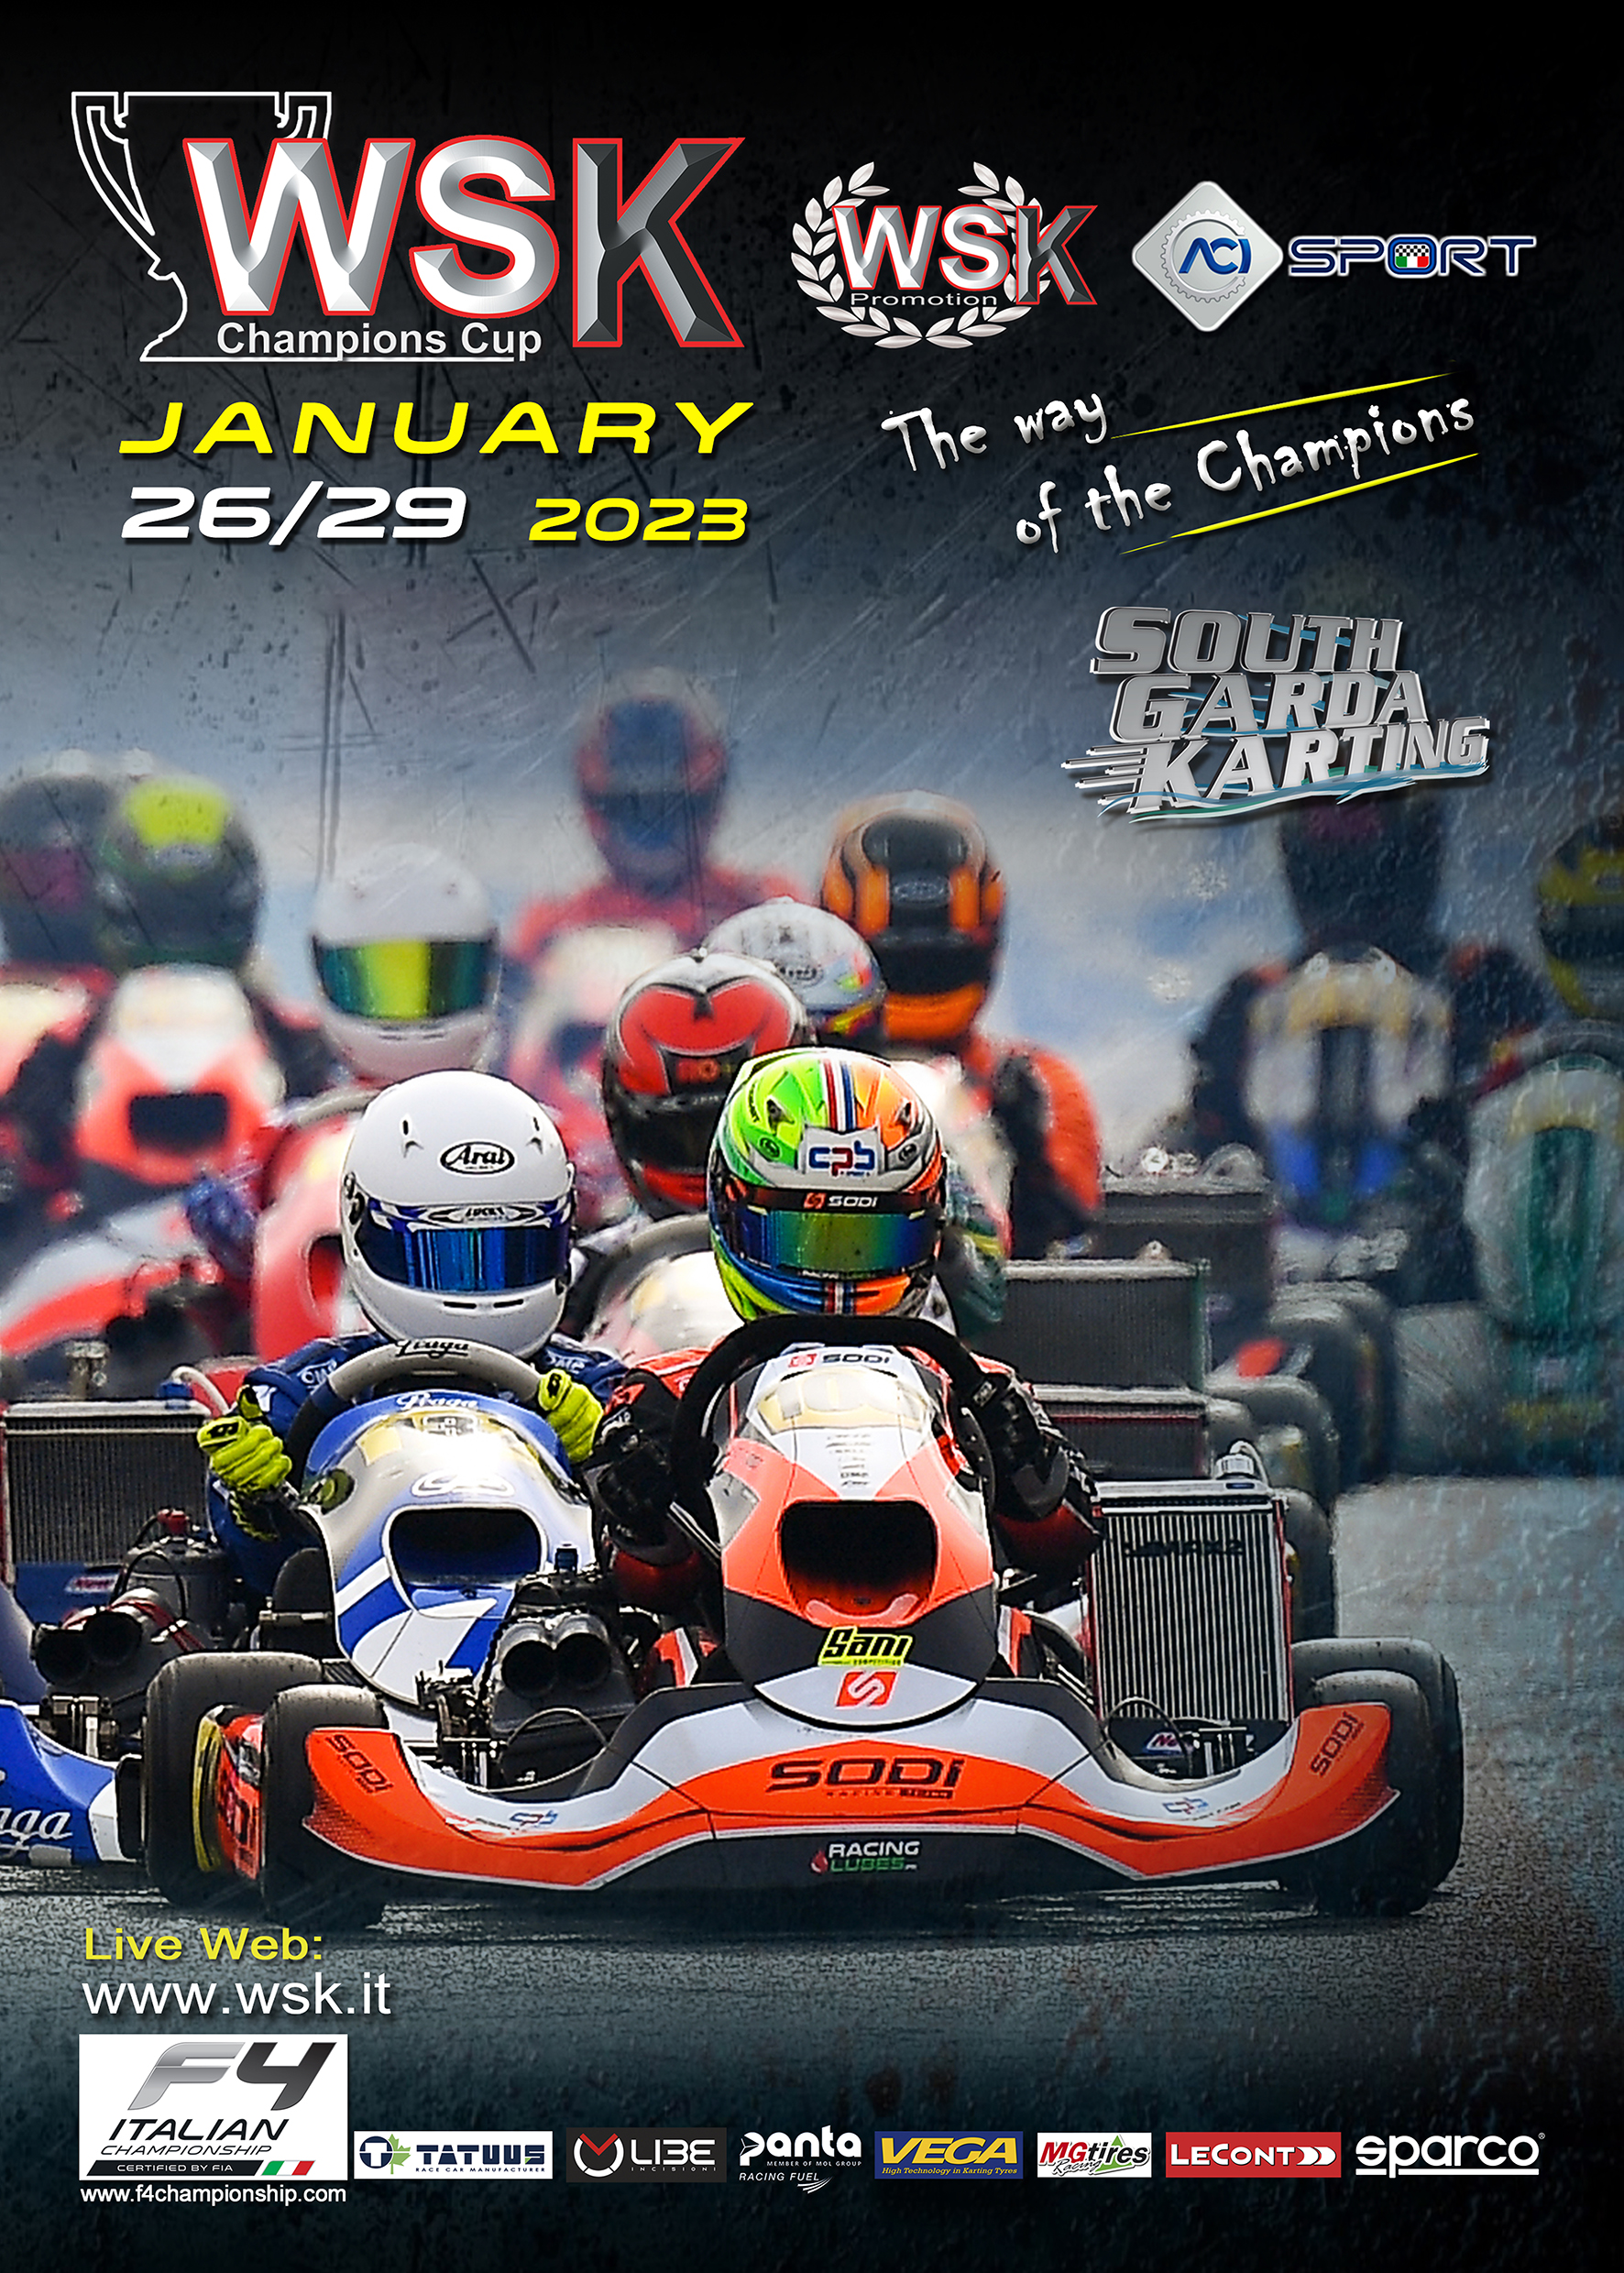 Magazine WSK Champions Cup